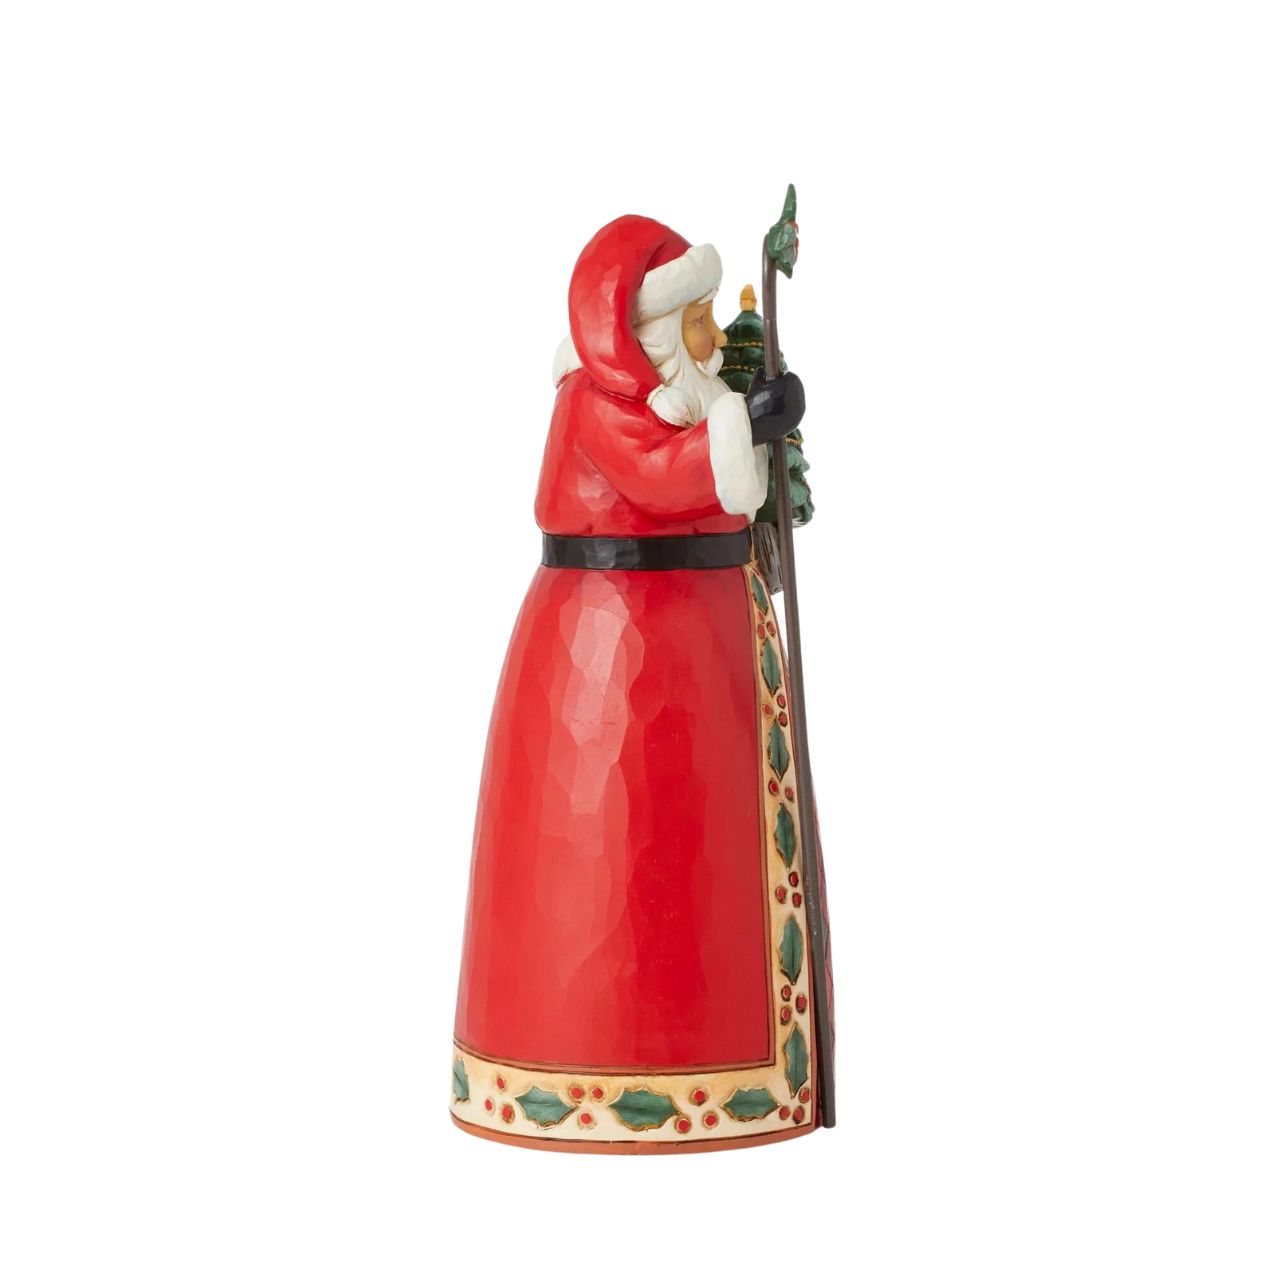 Heartwood Creek Highland Glen Santa Figurine  Designed by award winning artist Jim Shore as part of the Heartwood Creek Highland Glen Collection, hand crafted using high quality cast stone and hand painted, this festive Santa is perfect for the Christmas season.